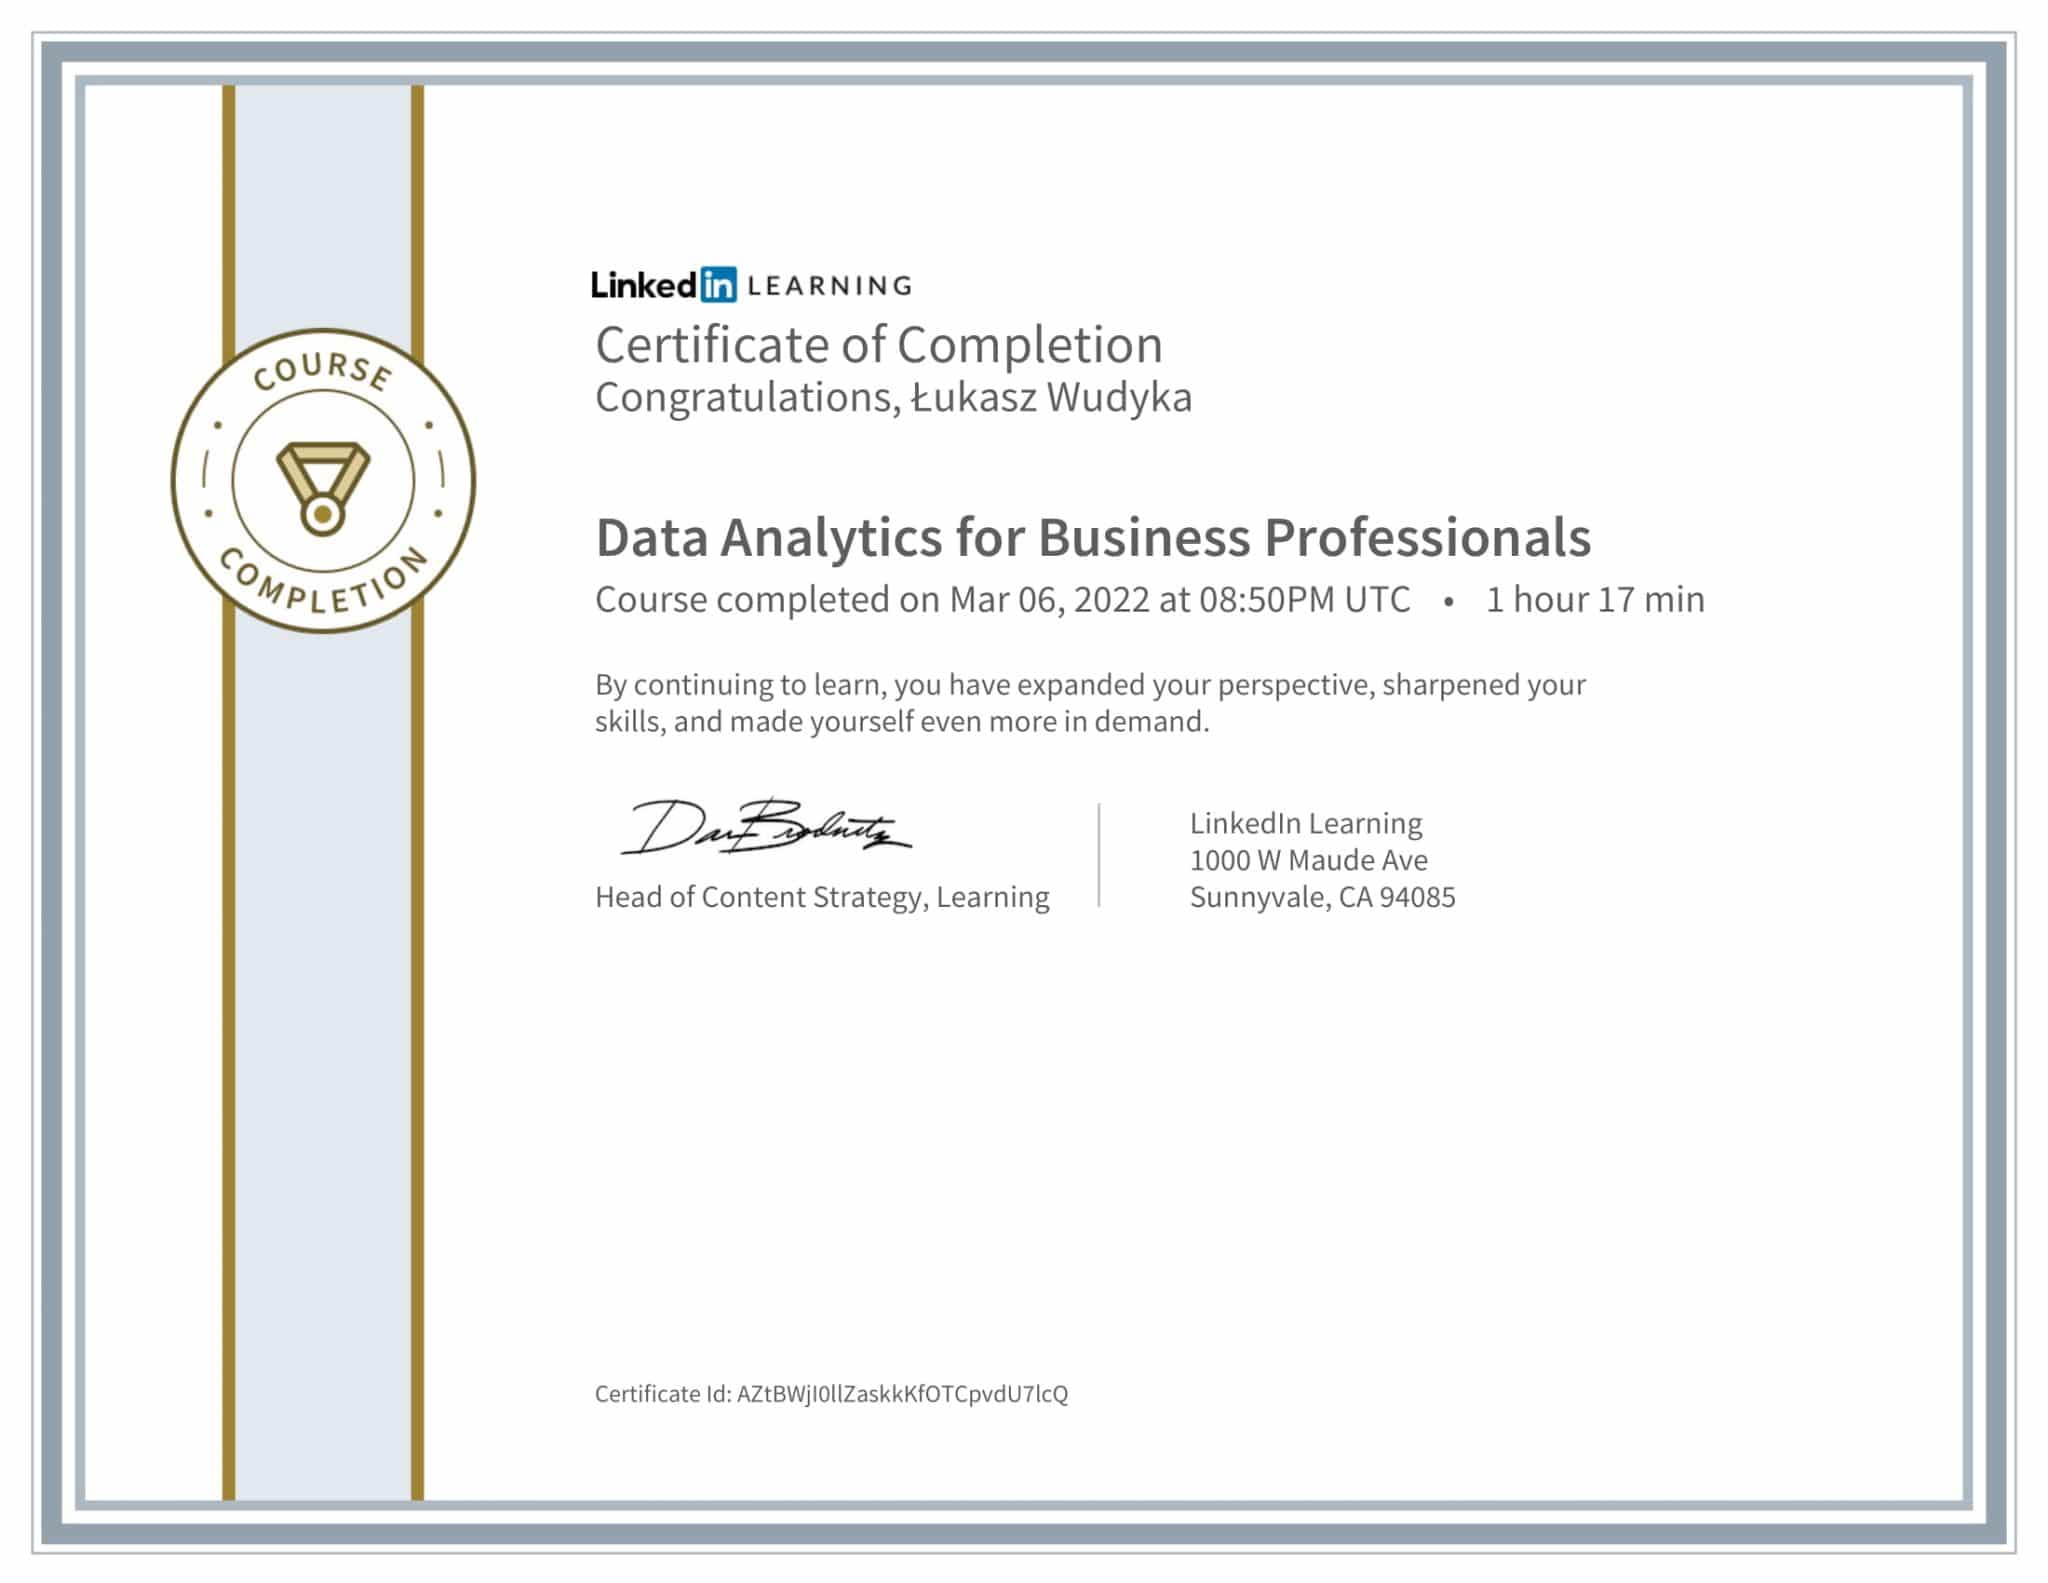 CertificateOfCompletion_Data Analytics for Business Professionals-1